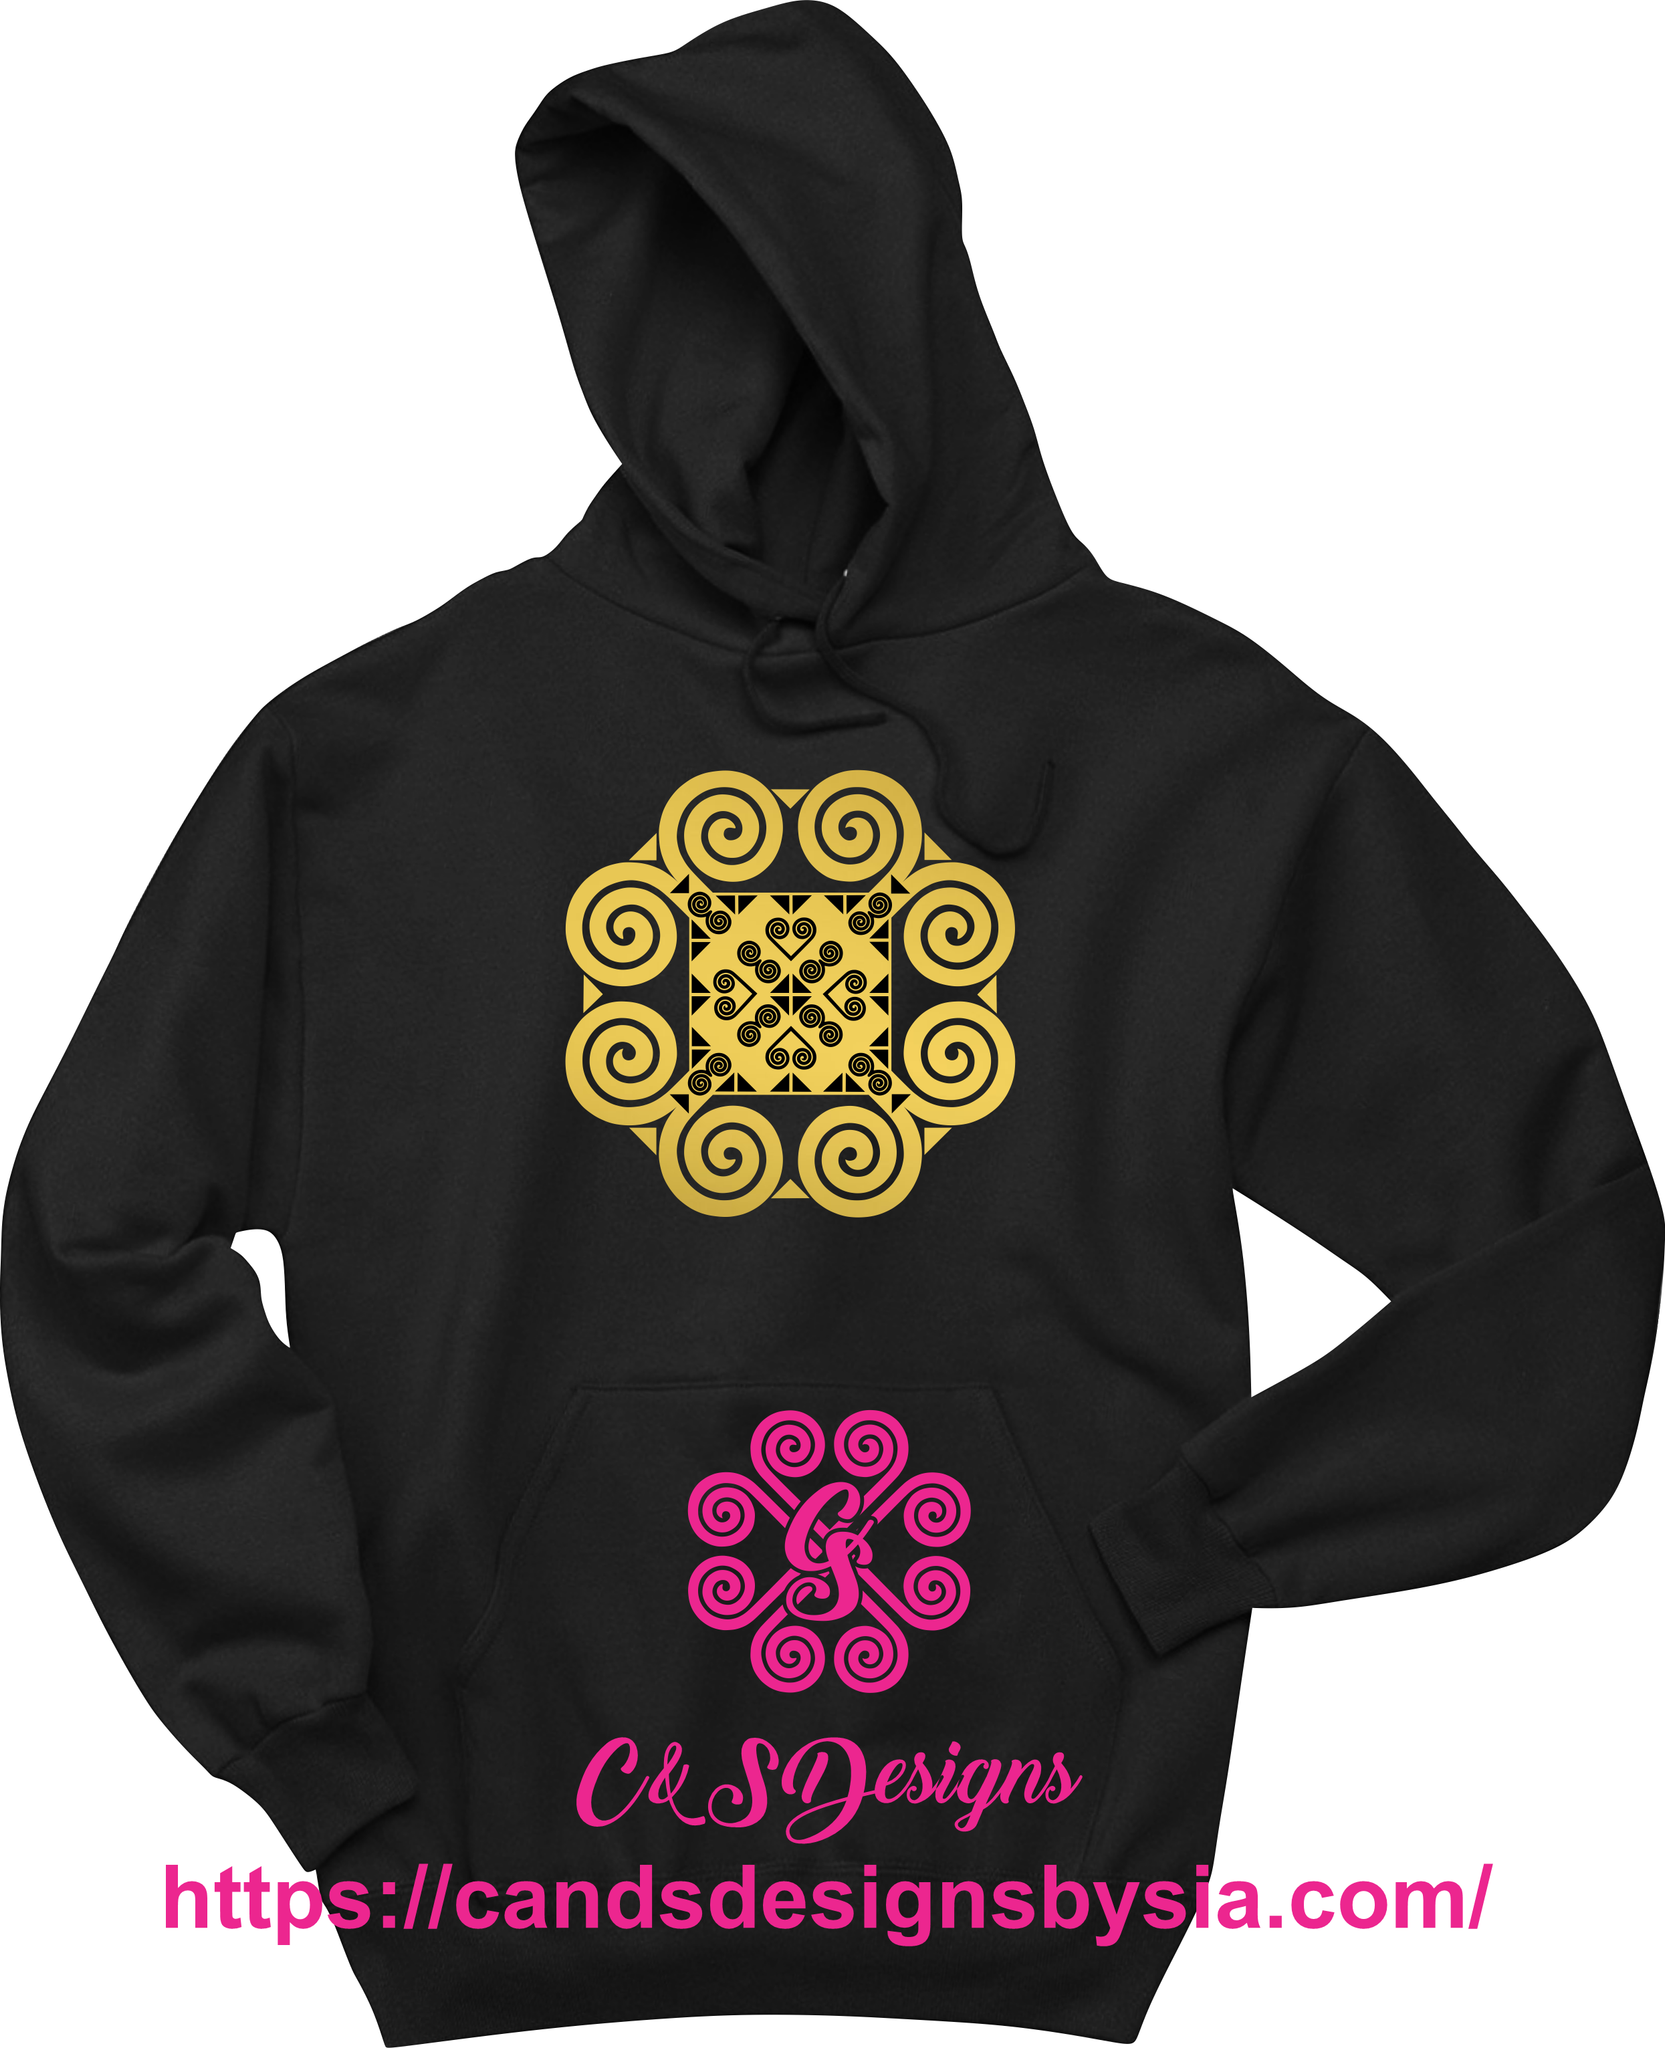 Heart Design Hoodie - EXTENDED SIZES